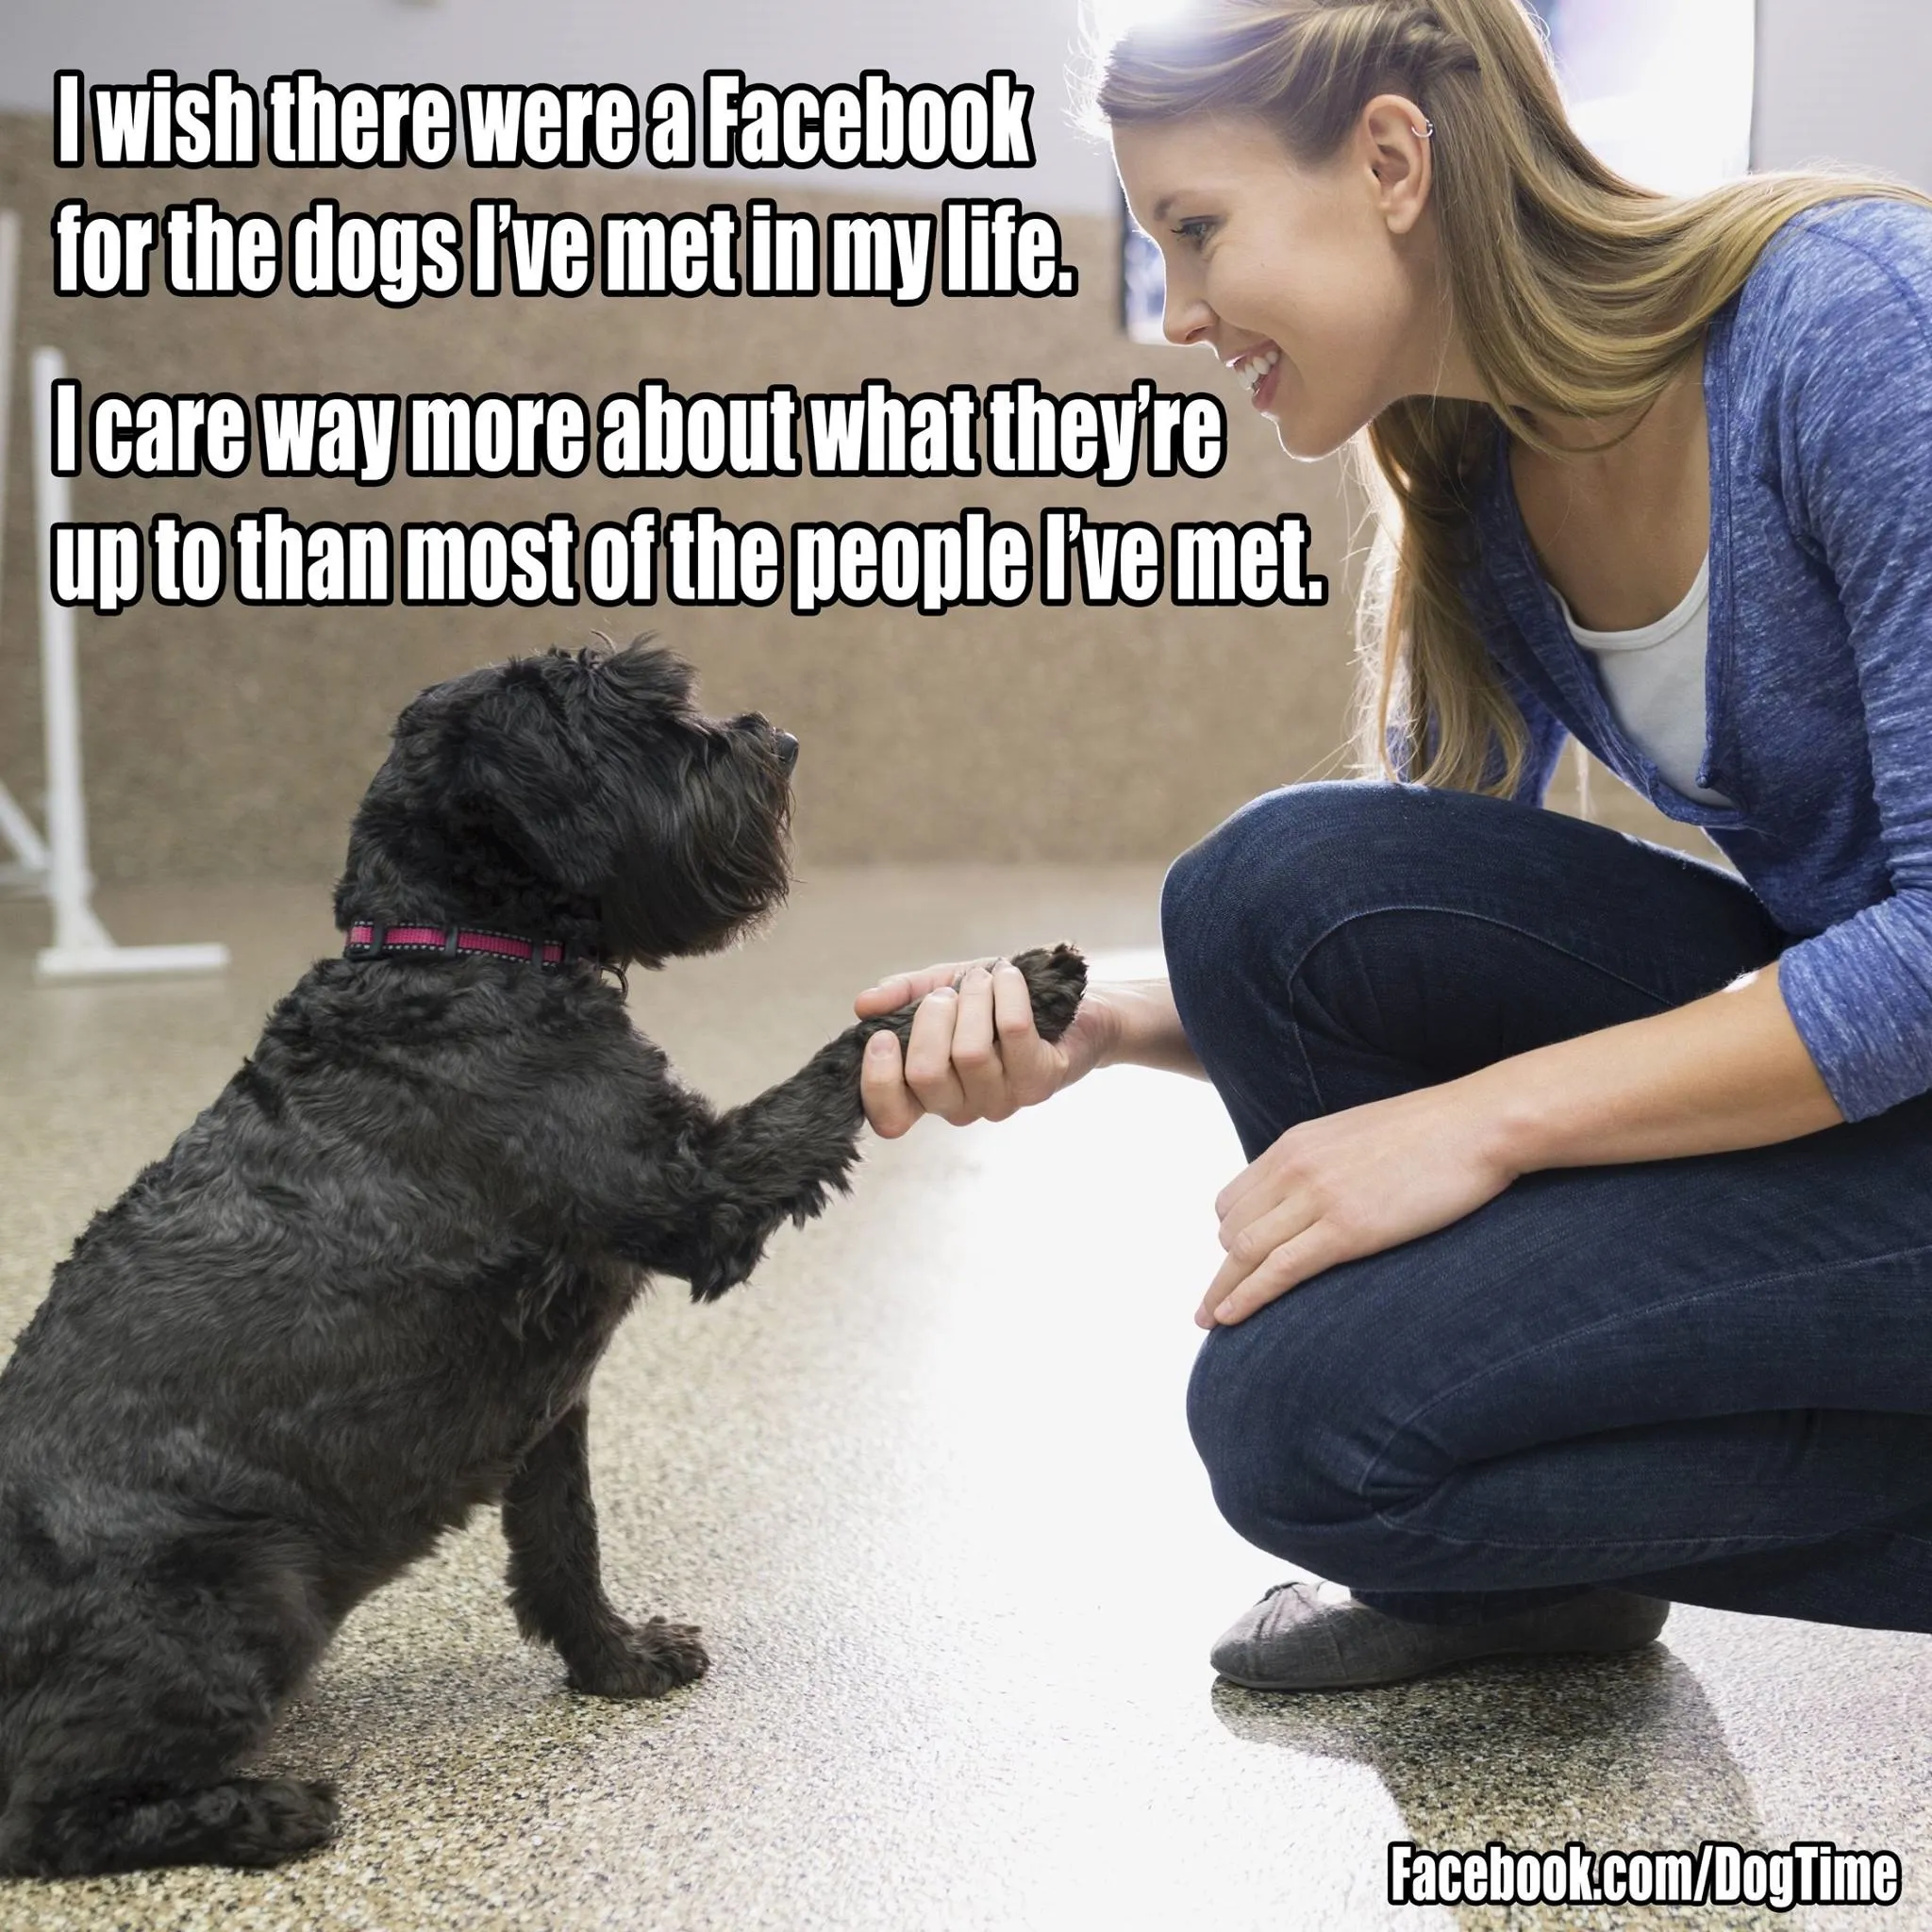 Facebook For Dogs